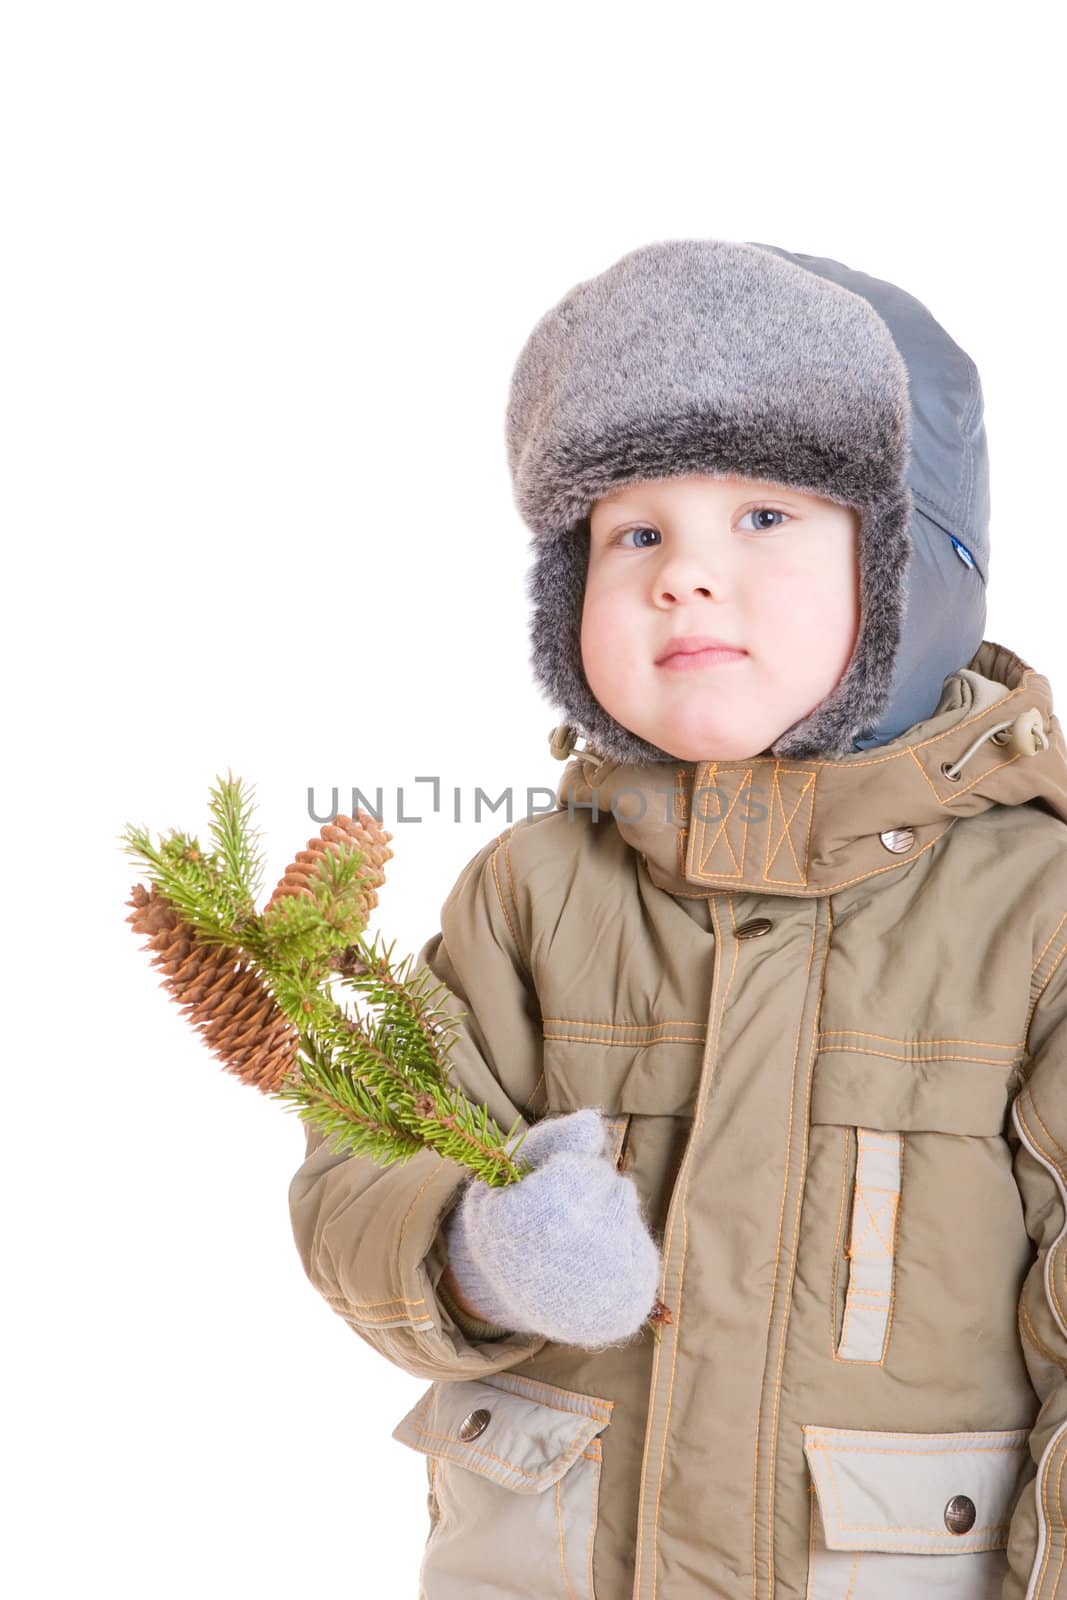 a thoughtful boy in winter coat with a branch of fur tree with cones by vsurkov